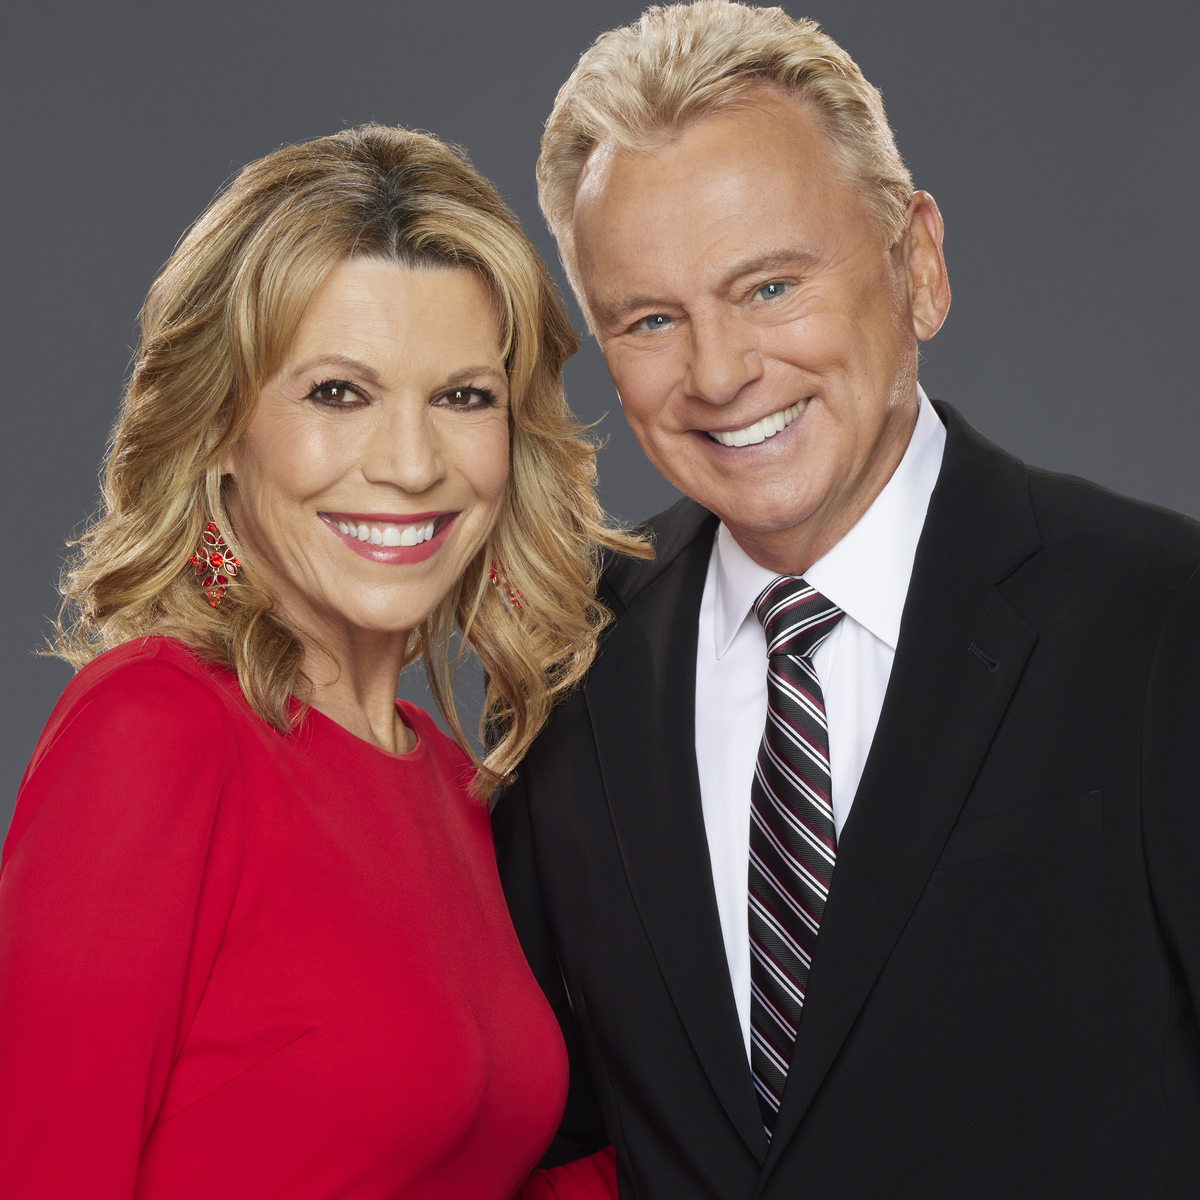 Teary Vanna White Honors Pat Sajak’s Wheel of Fortune Legacy